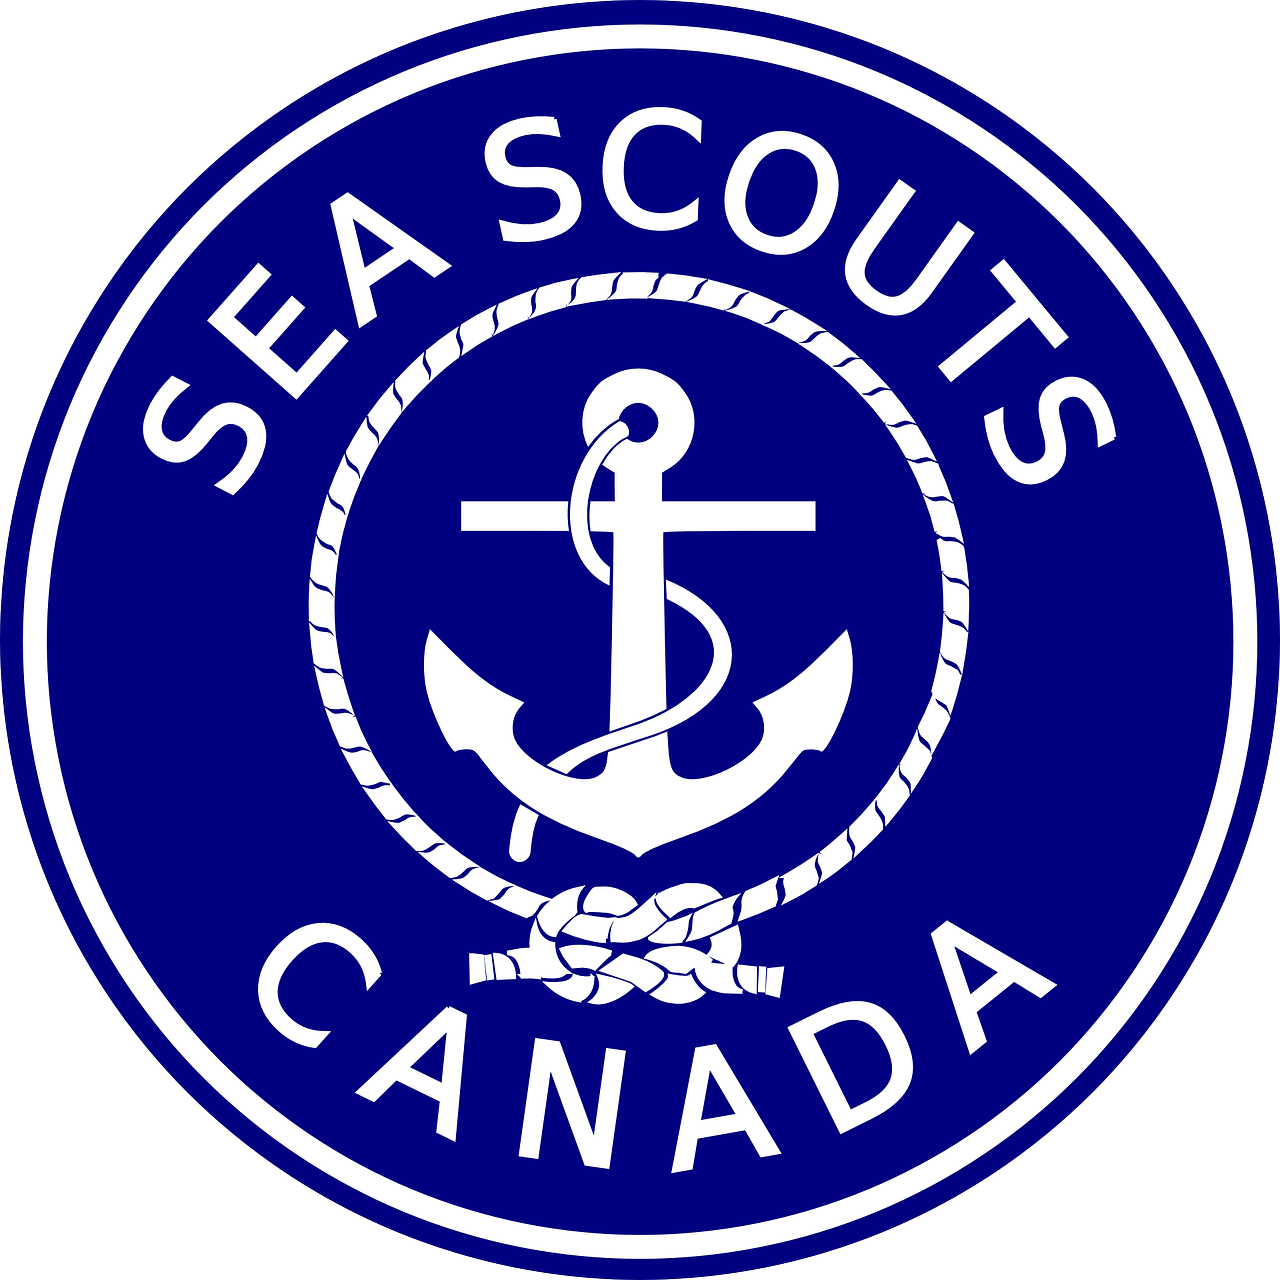 the logo for sea scouts canada, a portrait, by Jeanna bauck, cg society, secret tea society, jacques - yves cousteau, high quality photos, sza